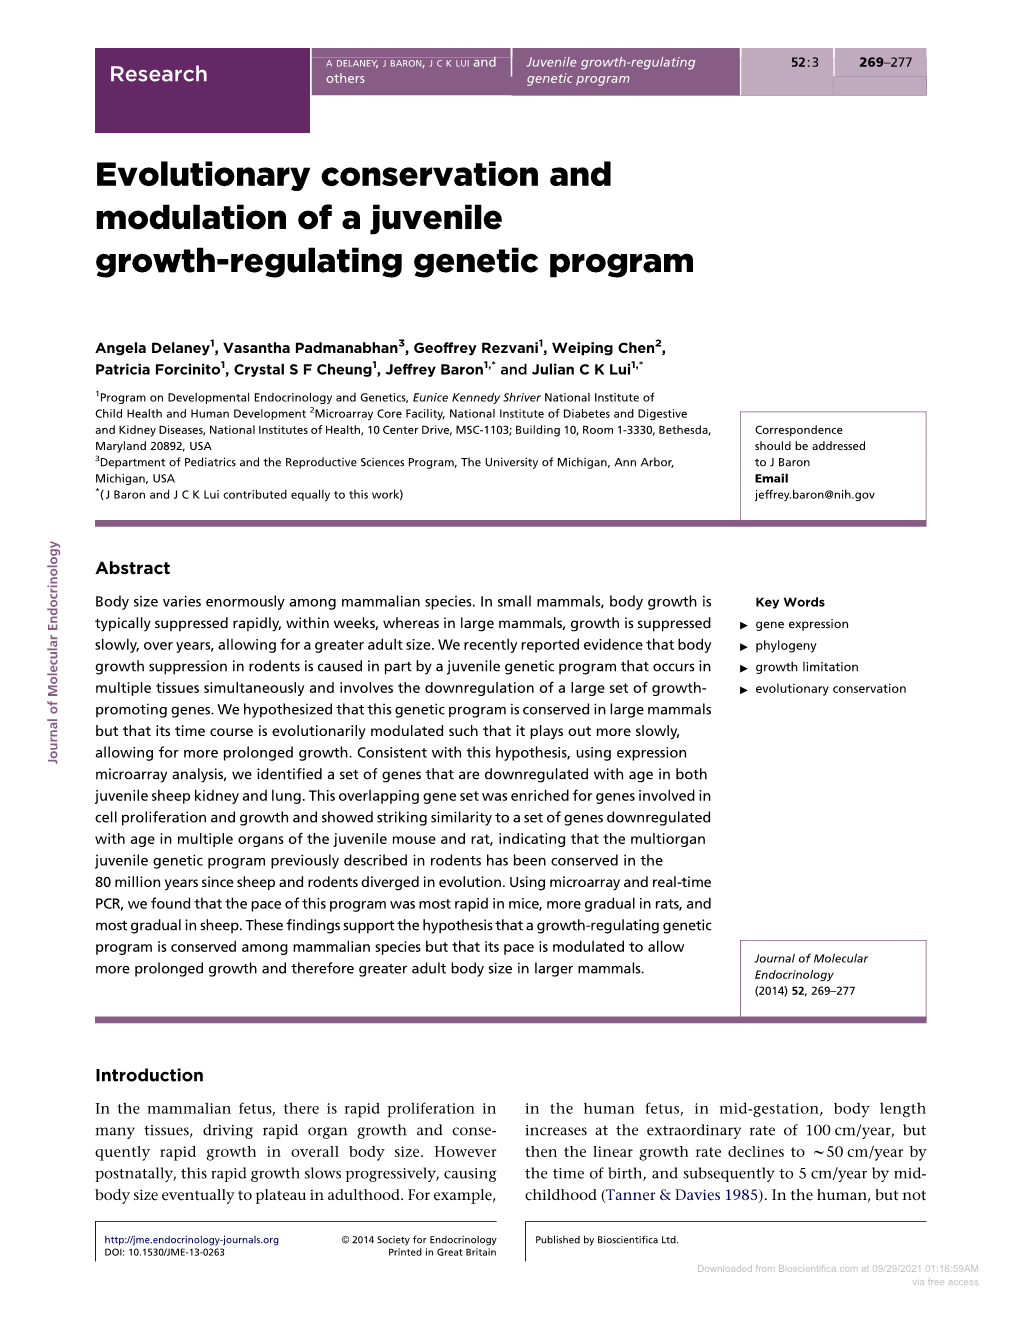 Evolutionary Conservation and Modulation of a Juvenile Growth-Regulating Genetic Program